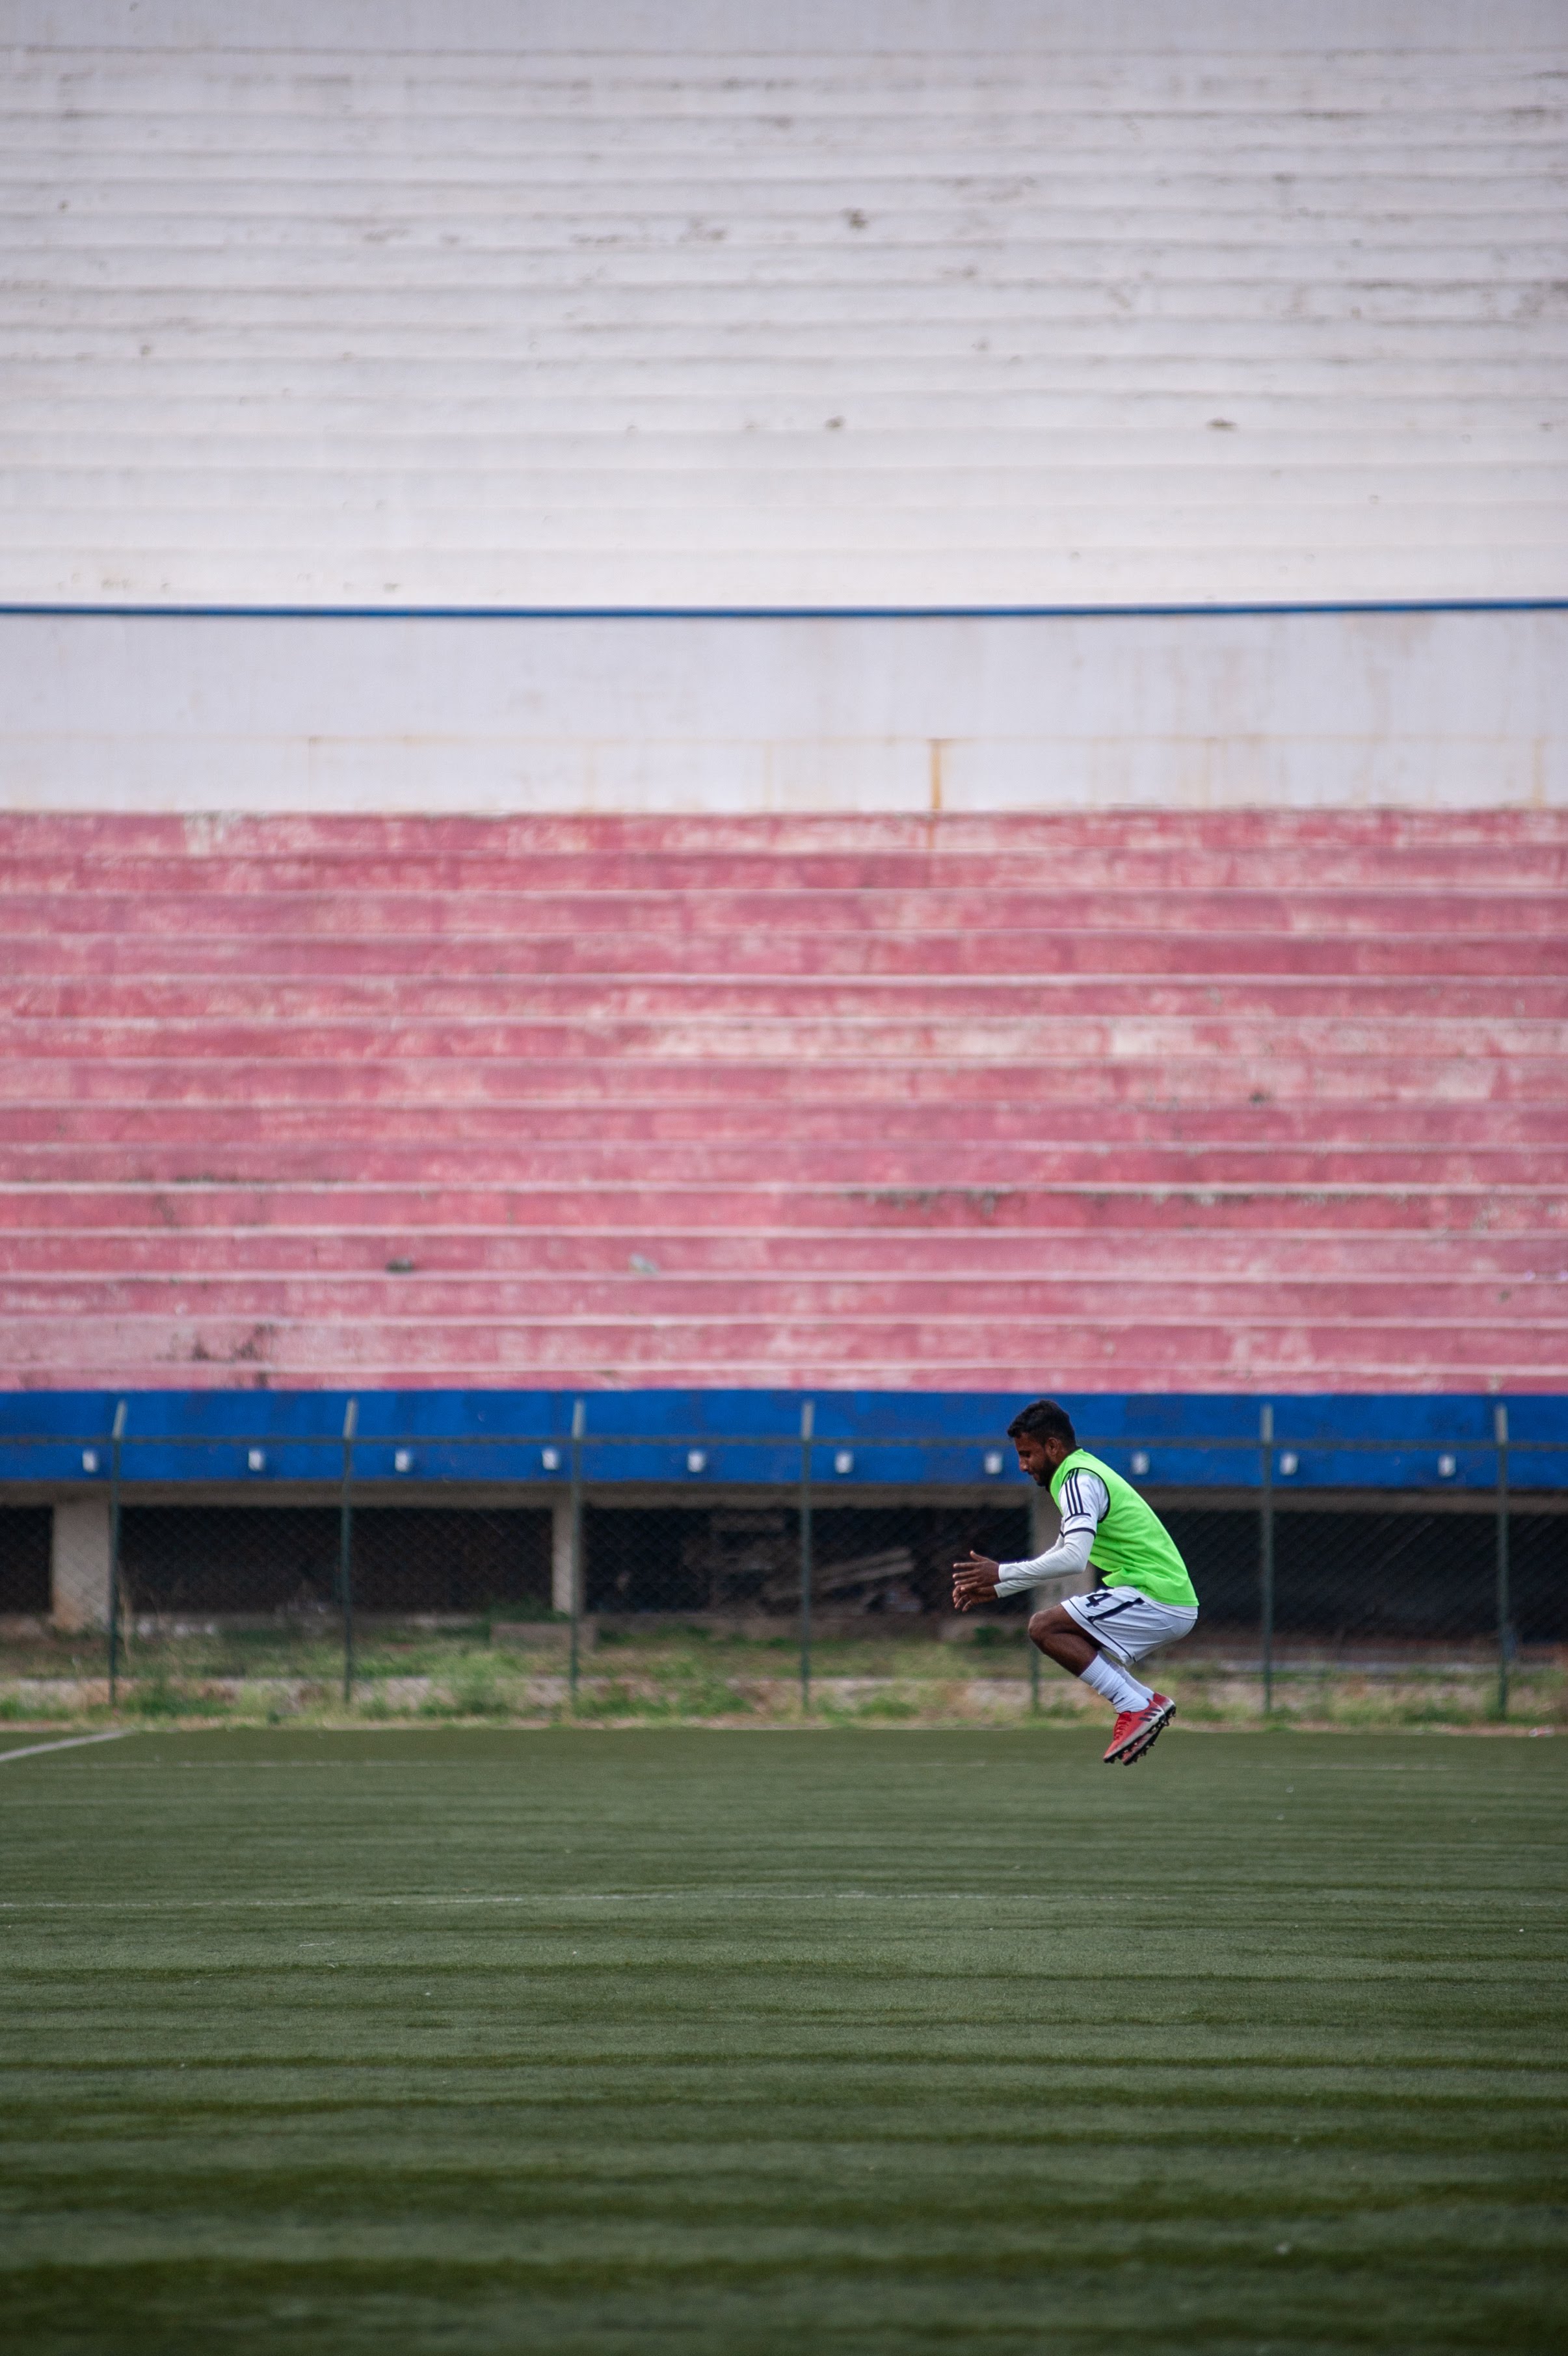 A Mohammedan Sporting player jumps up and down the width of the pitch to warm up during the half-time break.